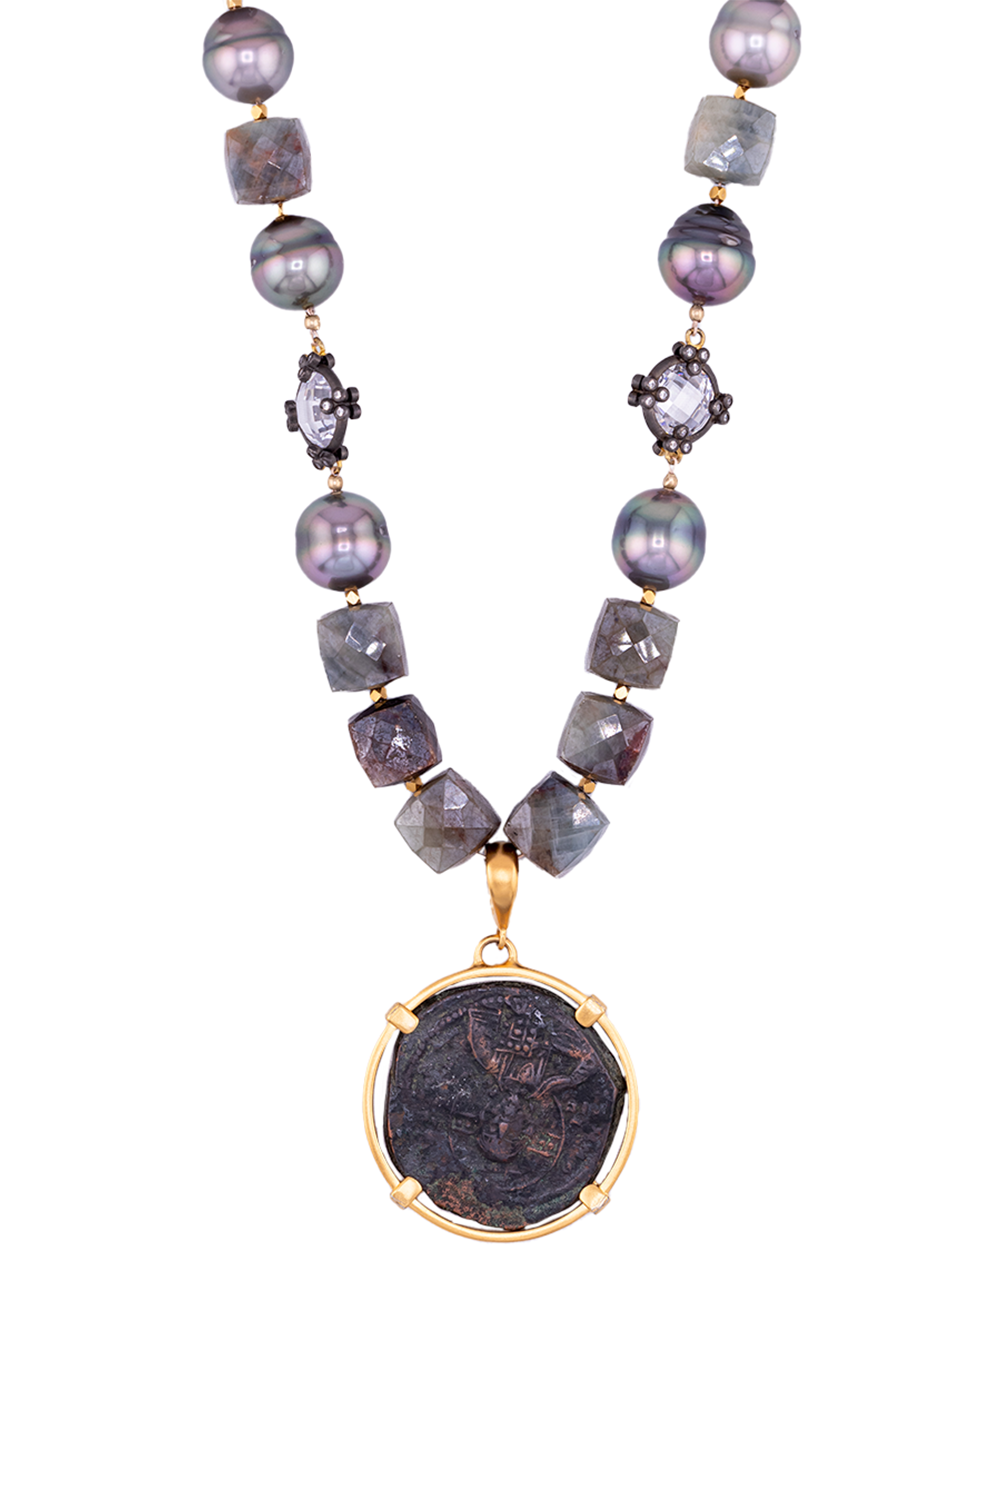 Christ King of Kings Coin Tahitian Pearl Sapphire Necklace